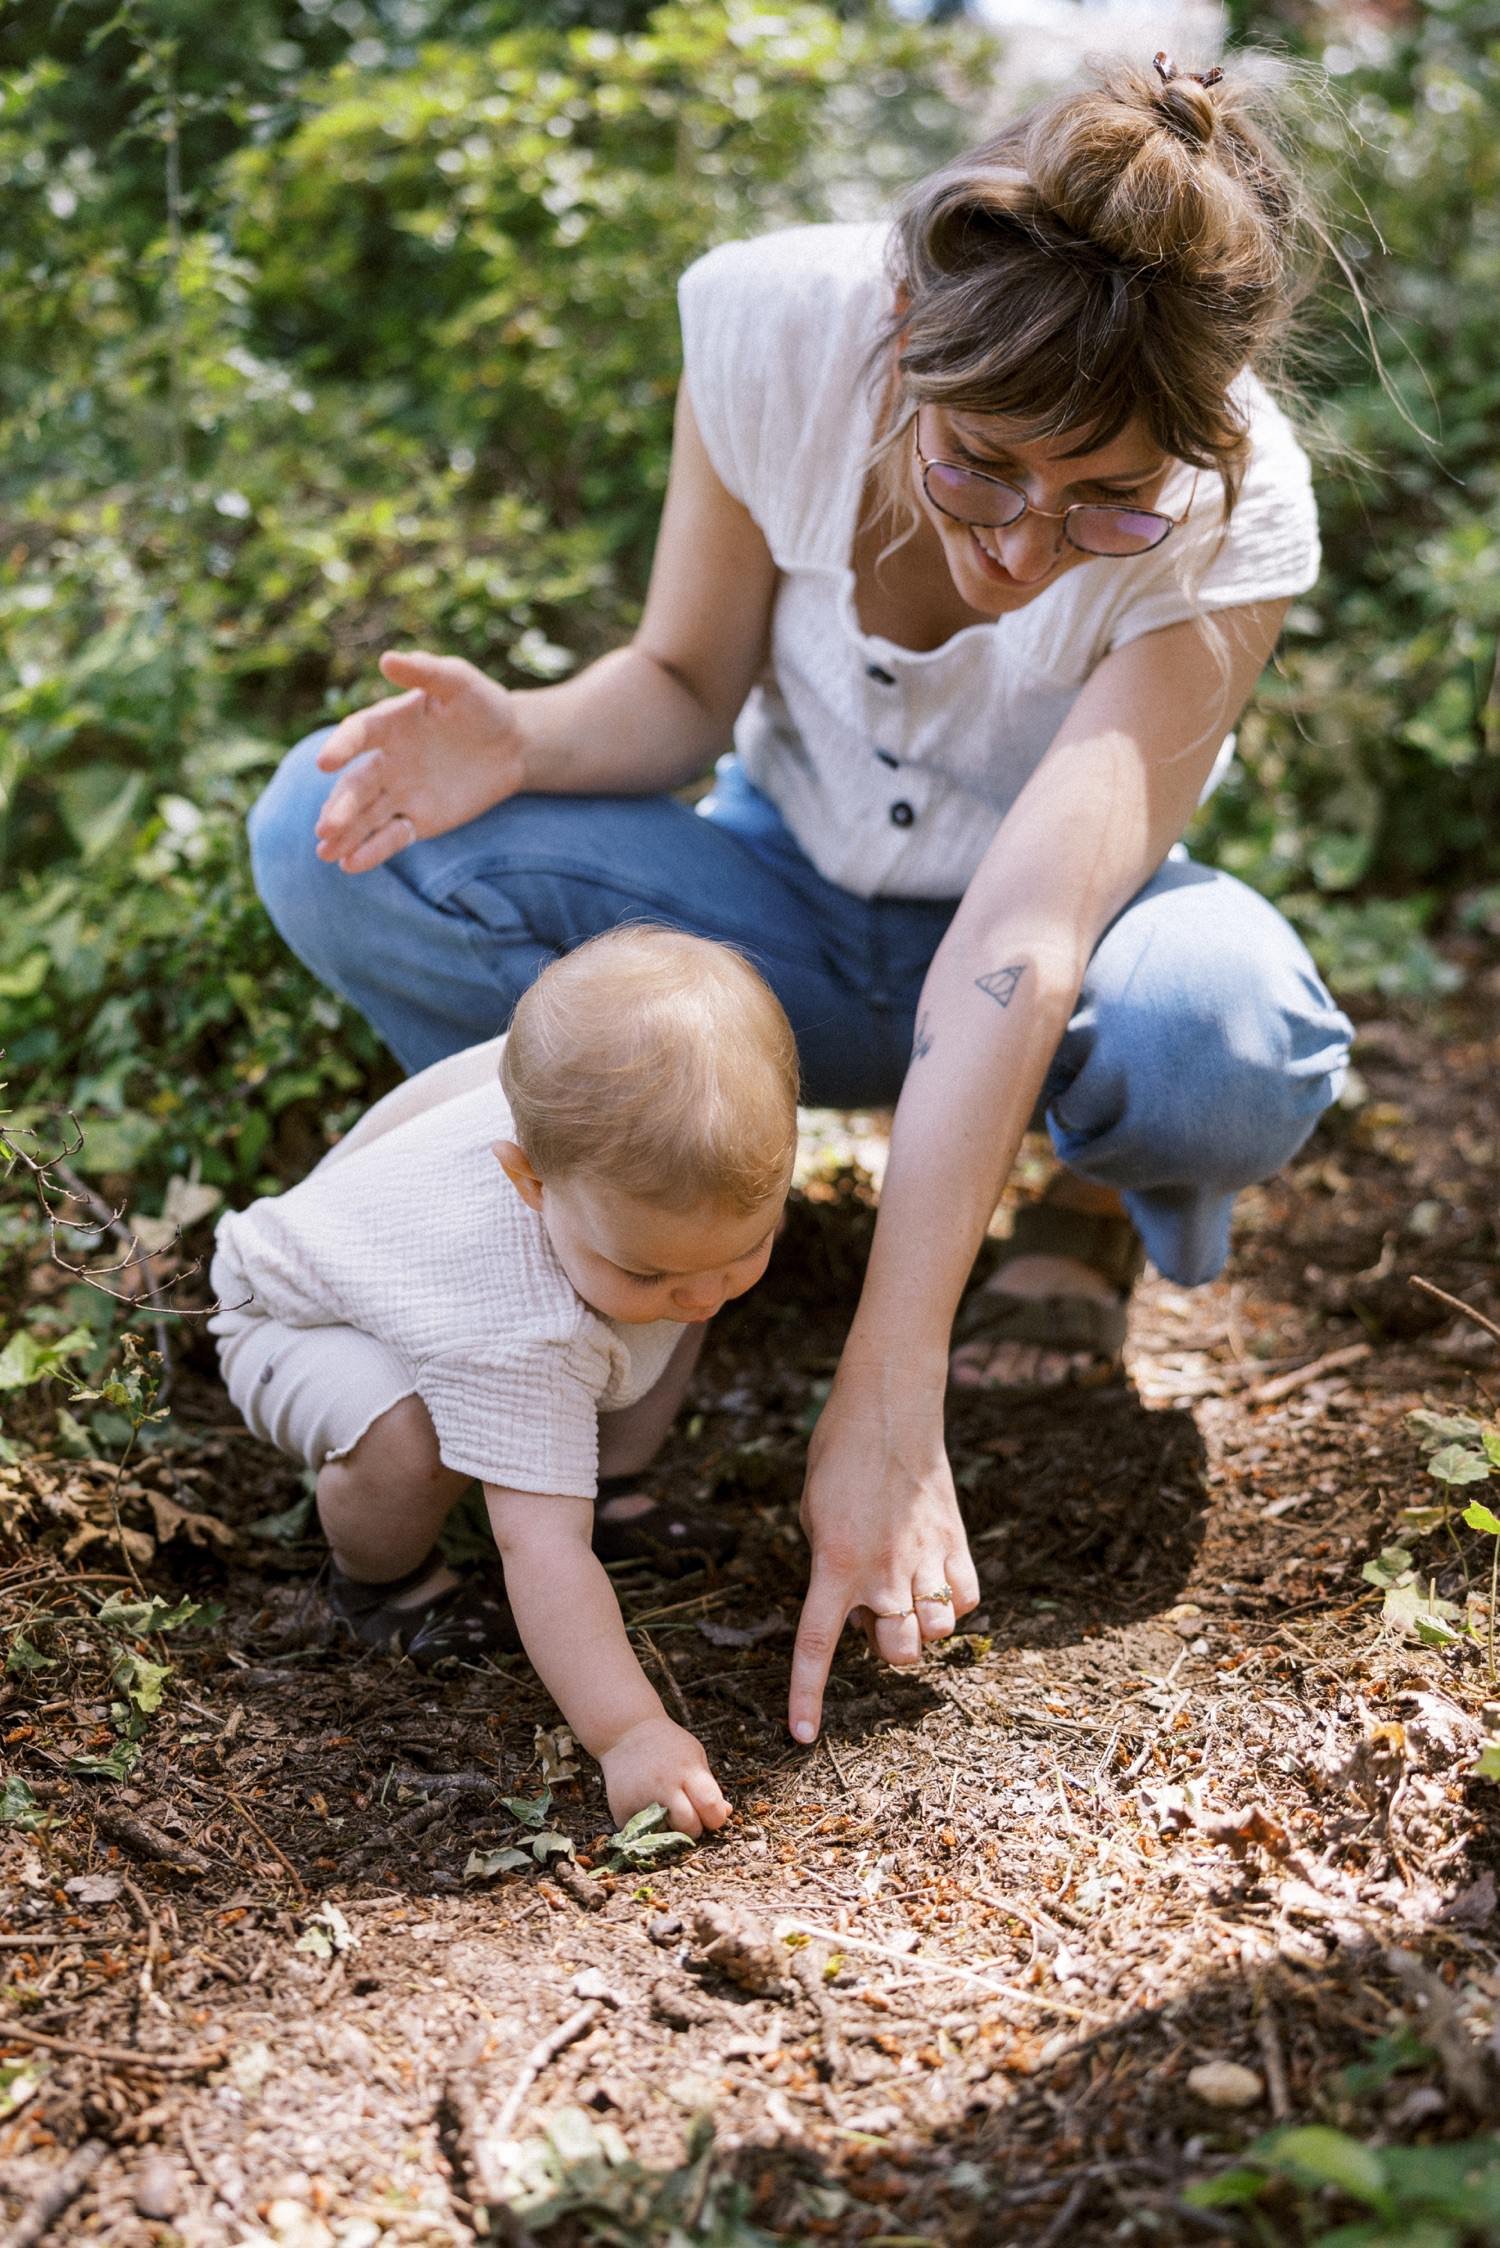 08_Portland Family Photographer-7328_mom points to bug in dirt while squatting next to baby daughter.jpg